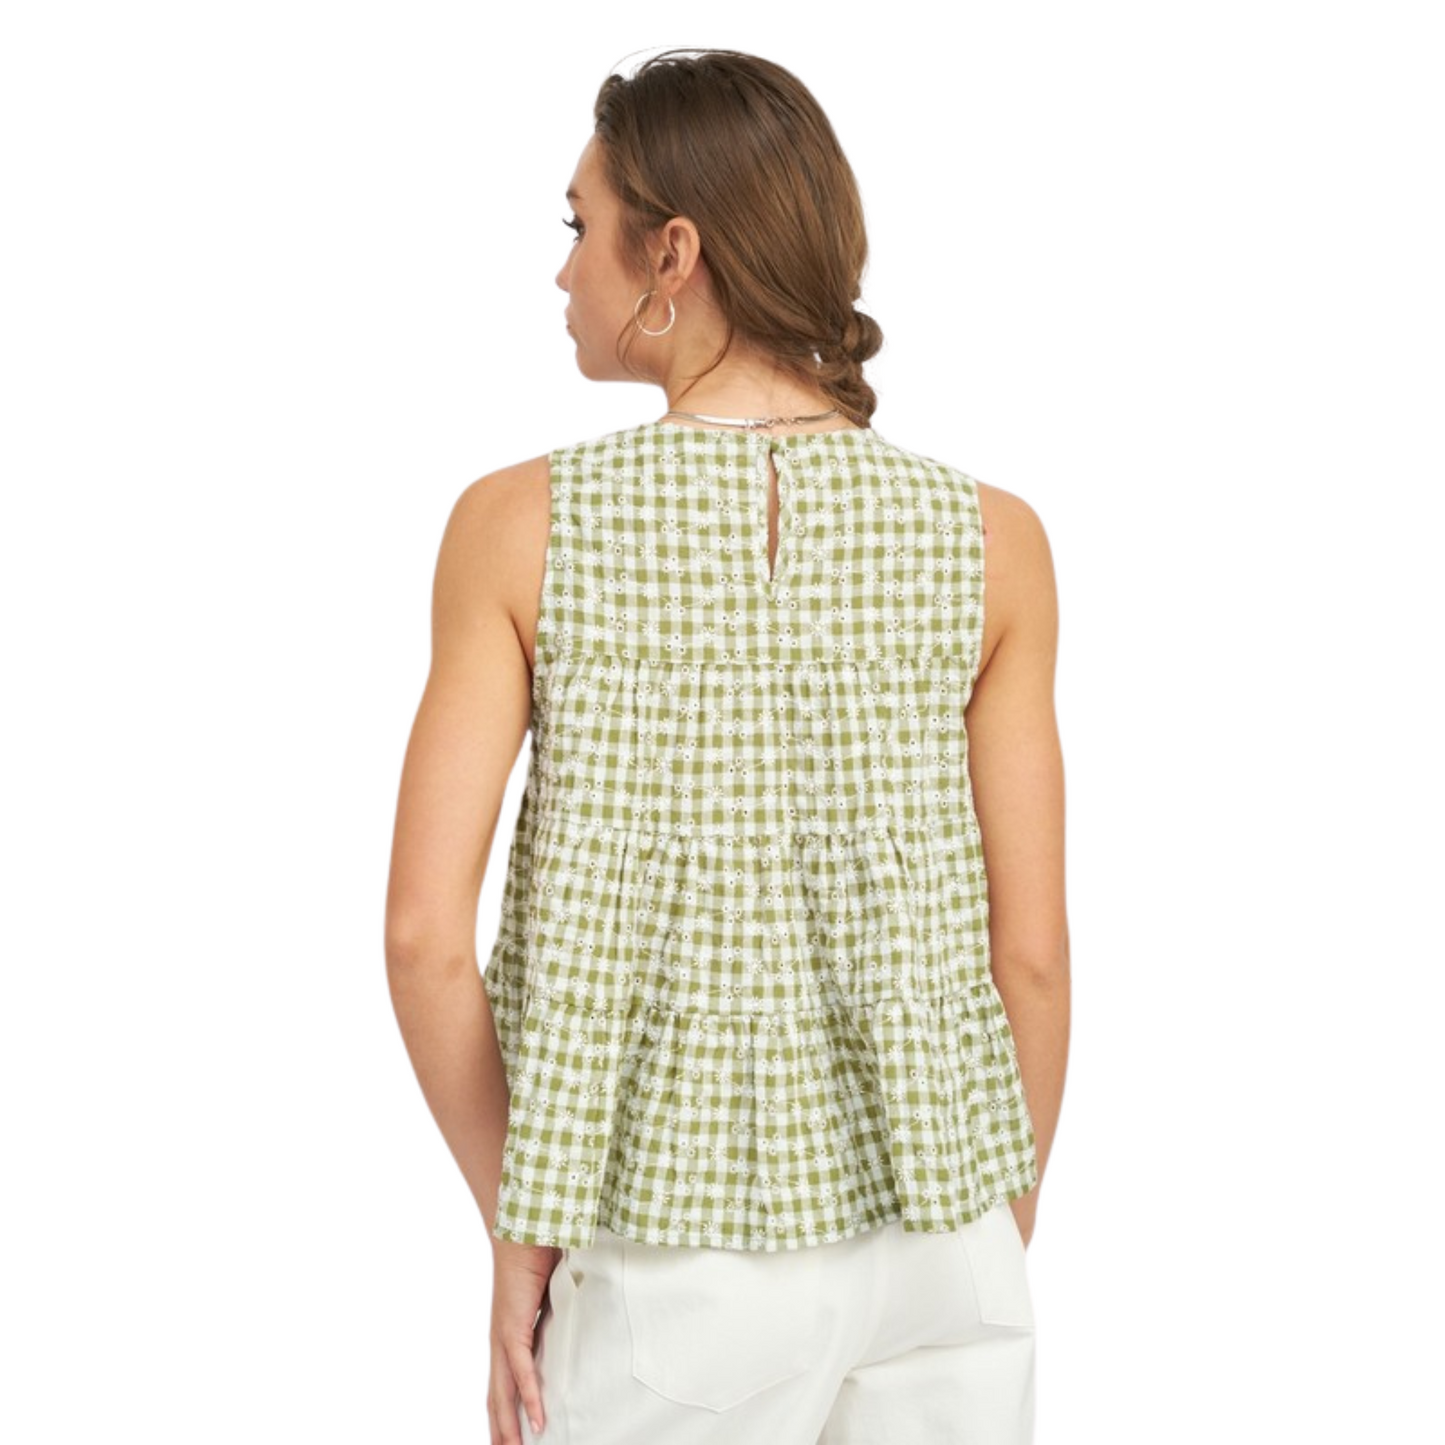 This Ruffled Sleeveless Top is made with lightweight fabric featuring a classic gingham pattern in green and white. Its sleeveless design and beautiful ruffles make it ideal for warm summer days.